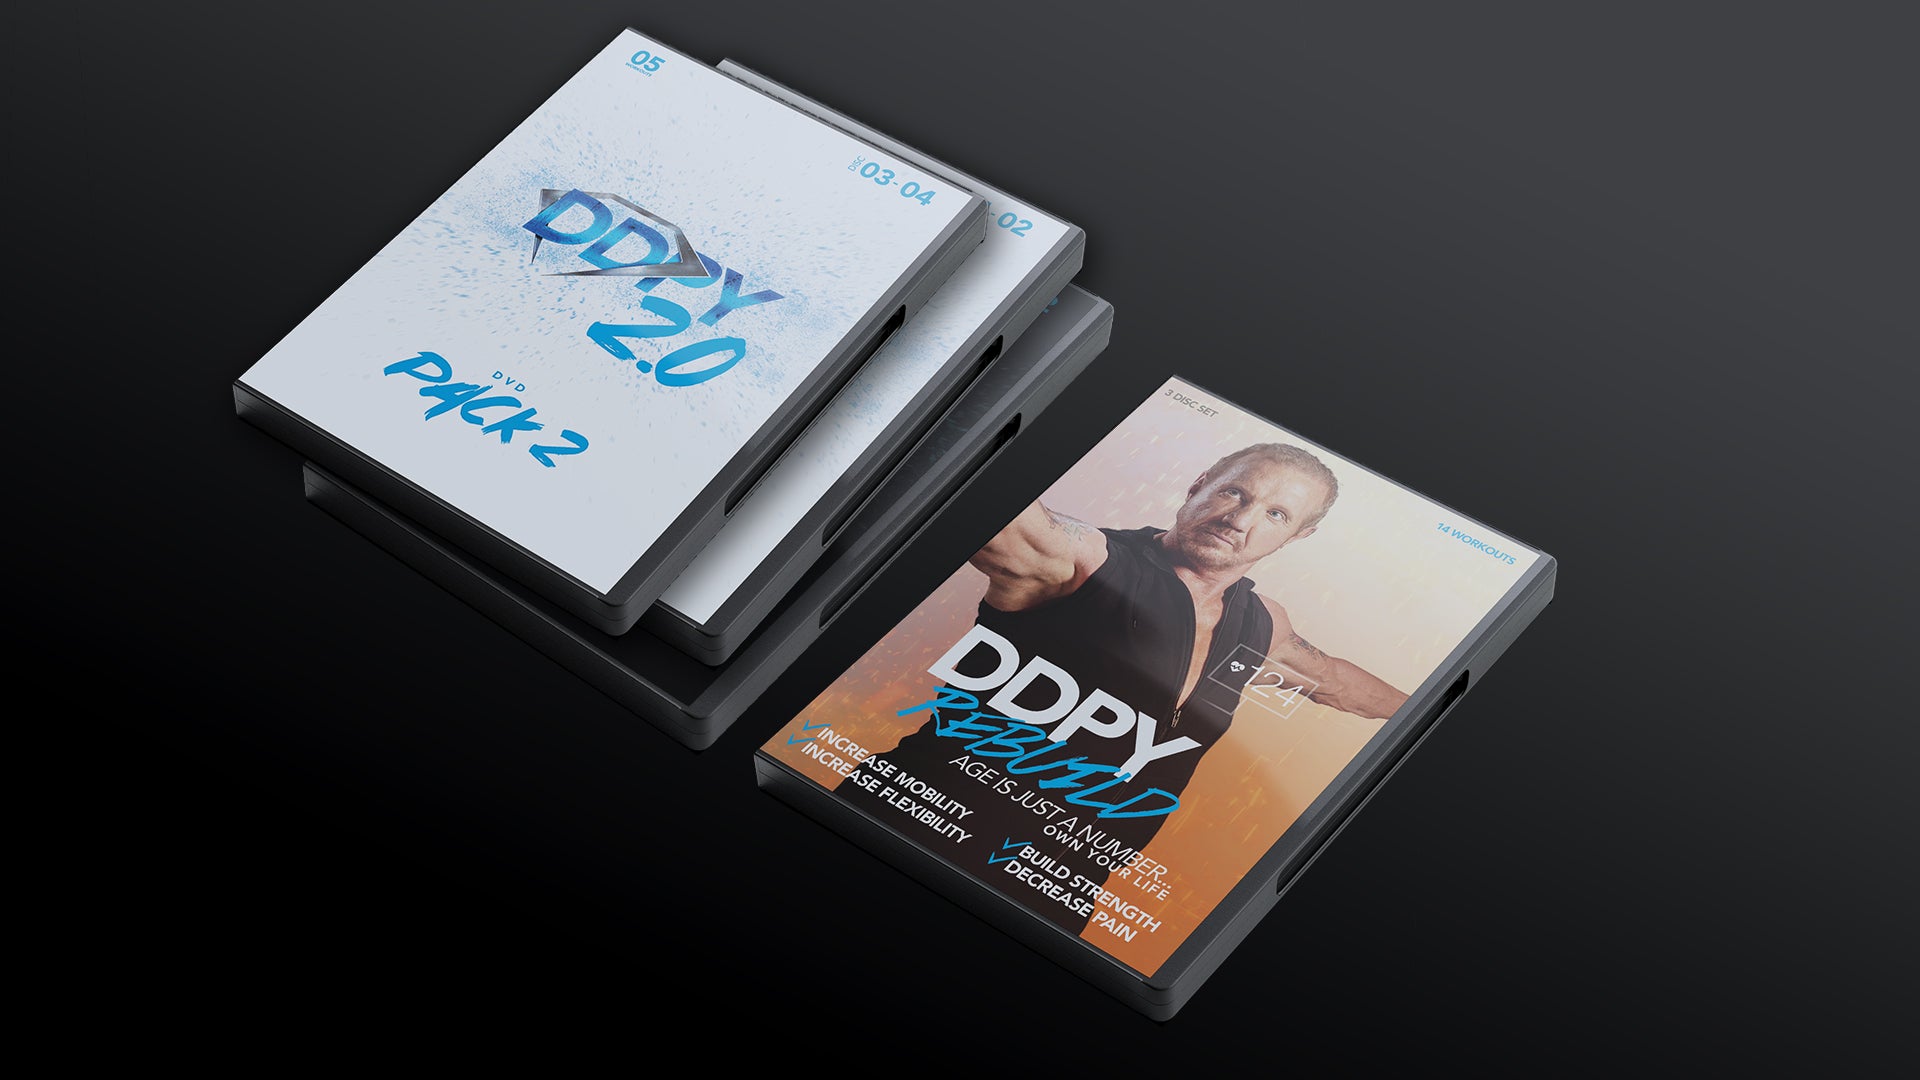 DDP YOGA - It's here! The Biggest Sale of the Year! The DDPY #BlackFriday  Sale! Now is your chance to save 30% 🤯 on all DVDs or a 1 Year App  Subscription!